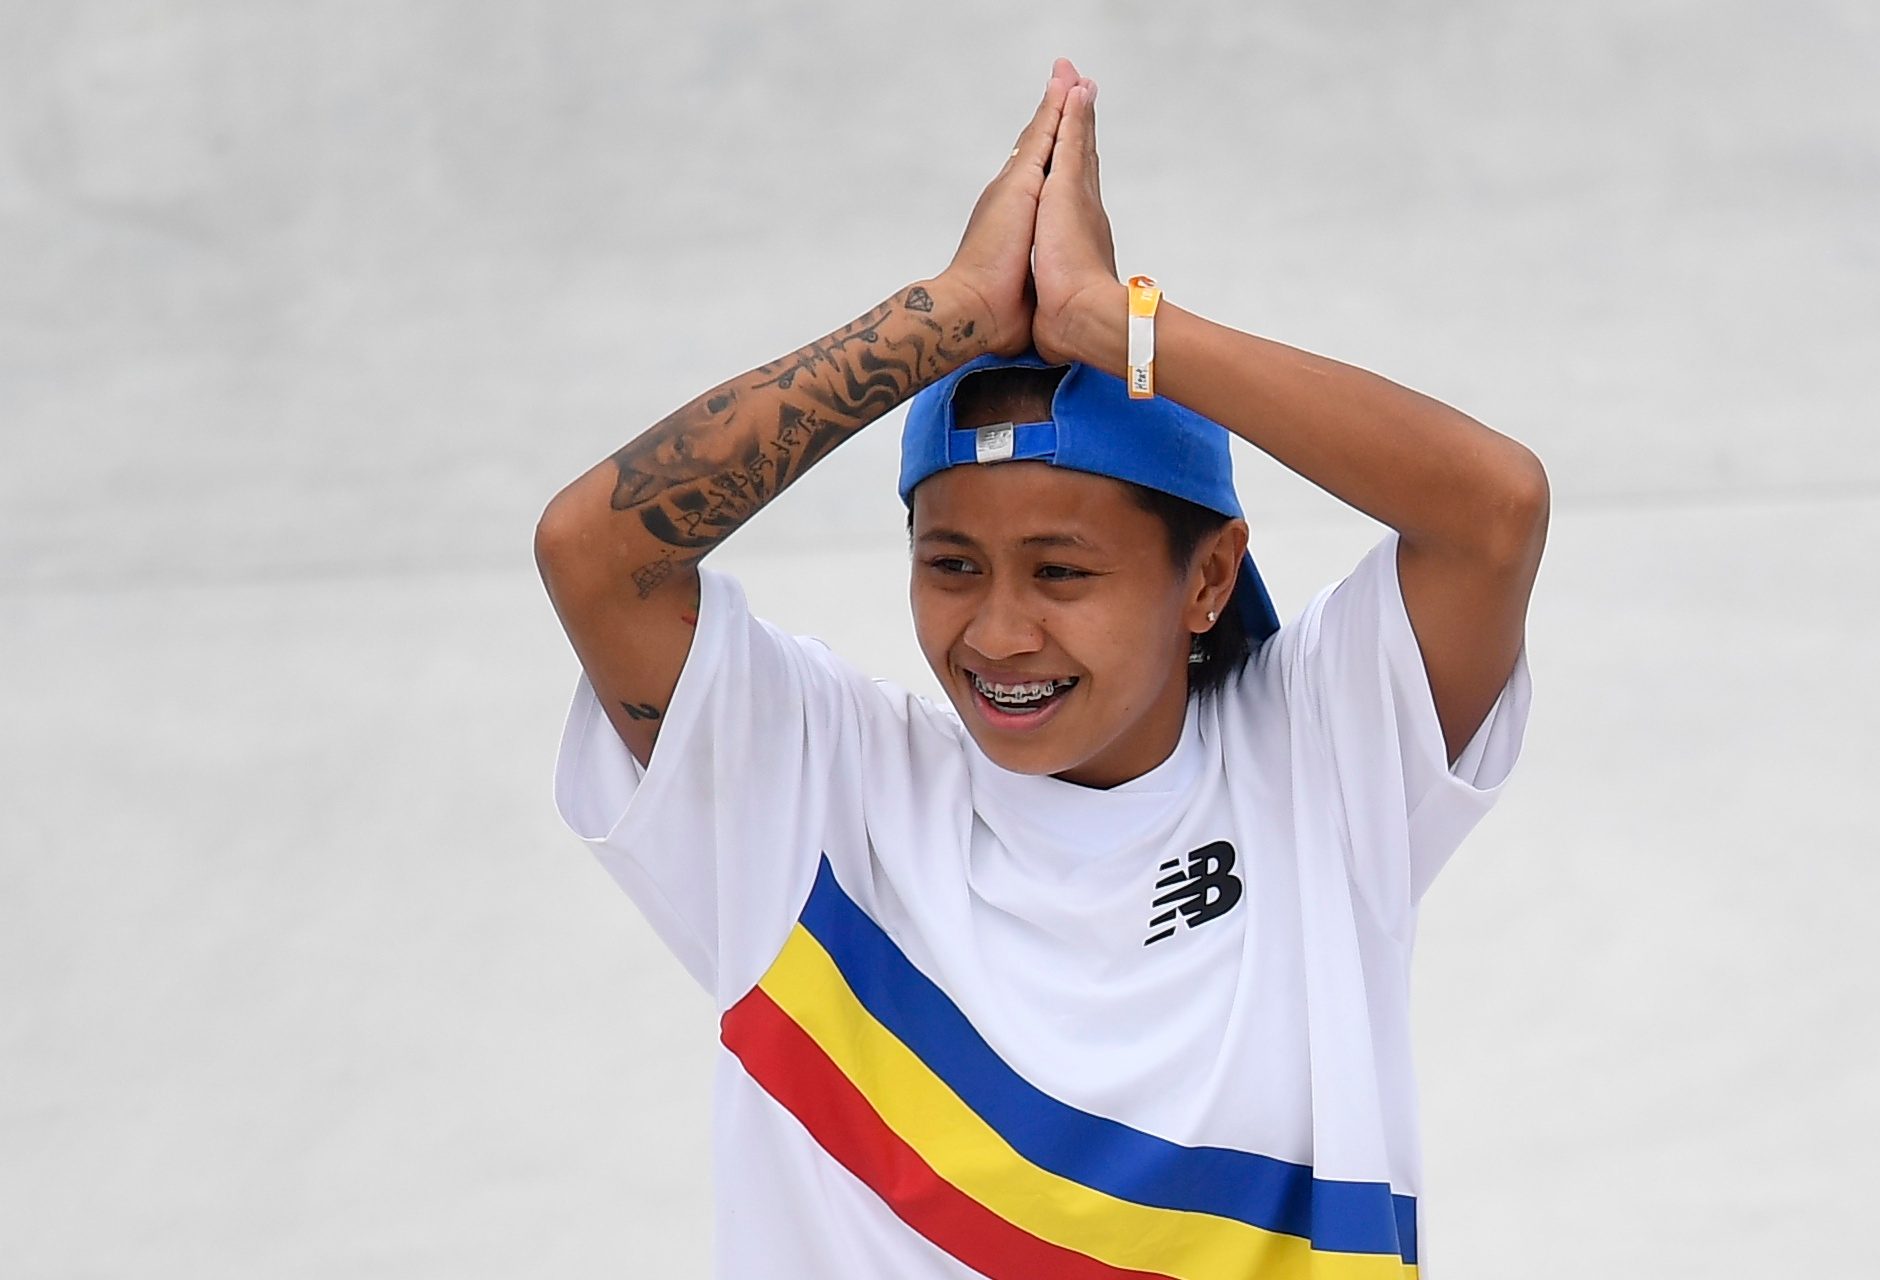 Margielyn Didal lands at 7th, 13-year-old Japanese rules Olympic street skateboarding